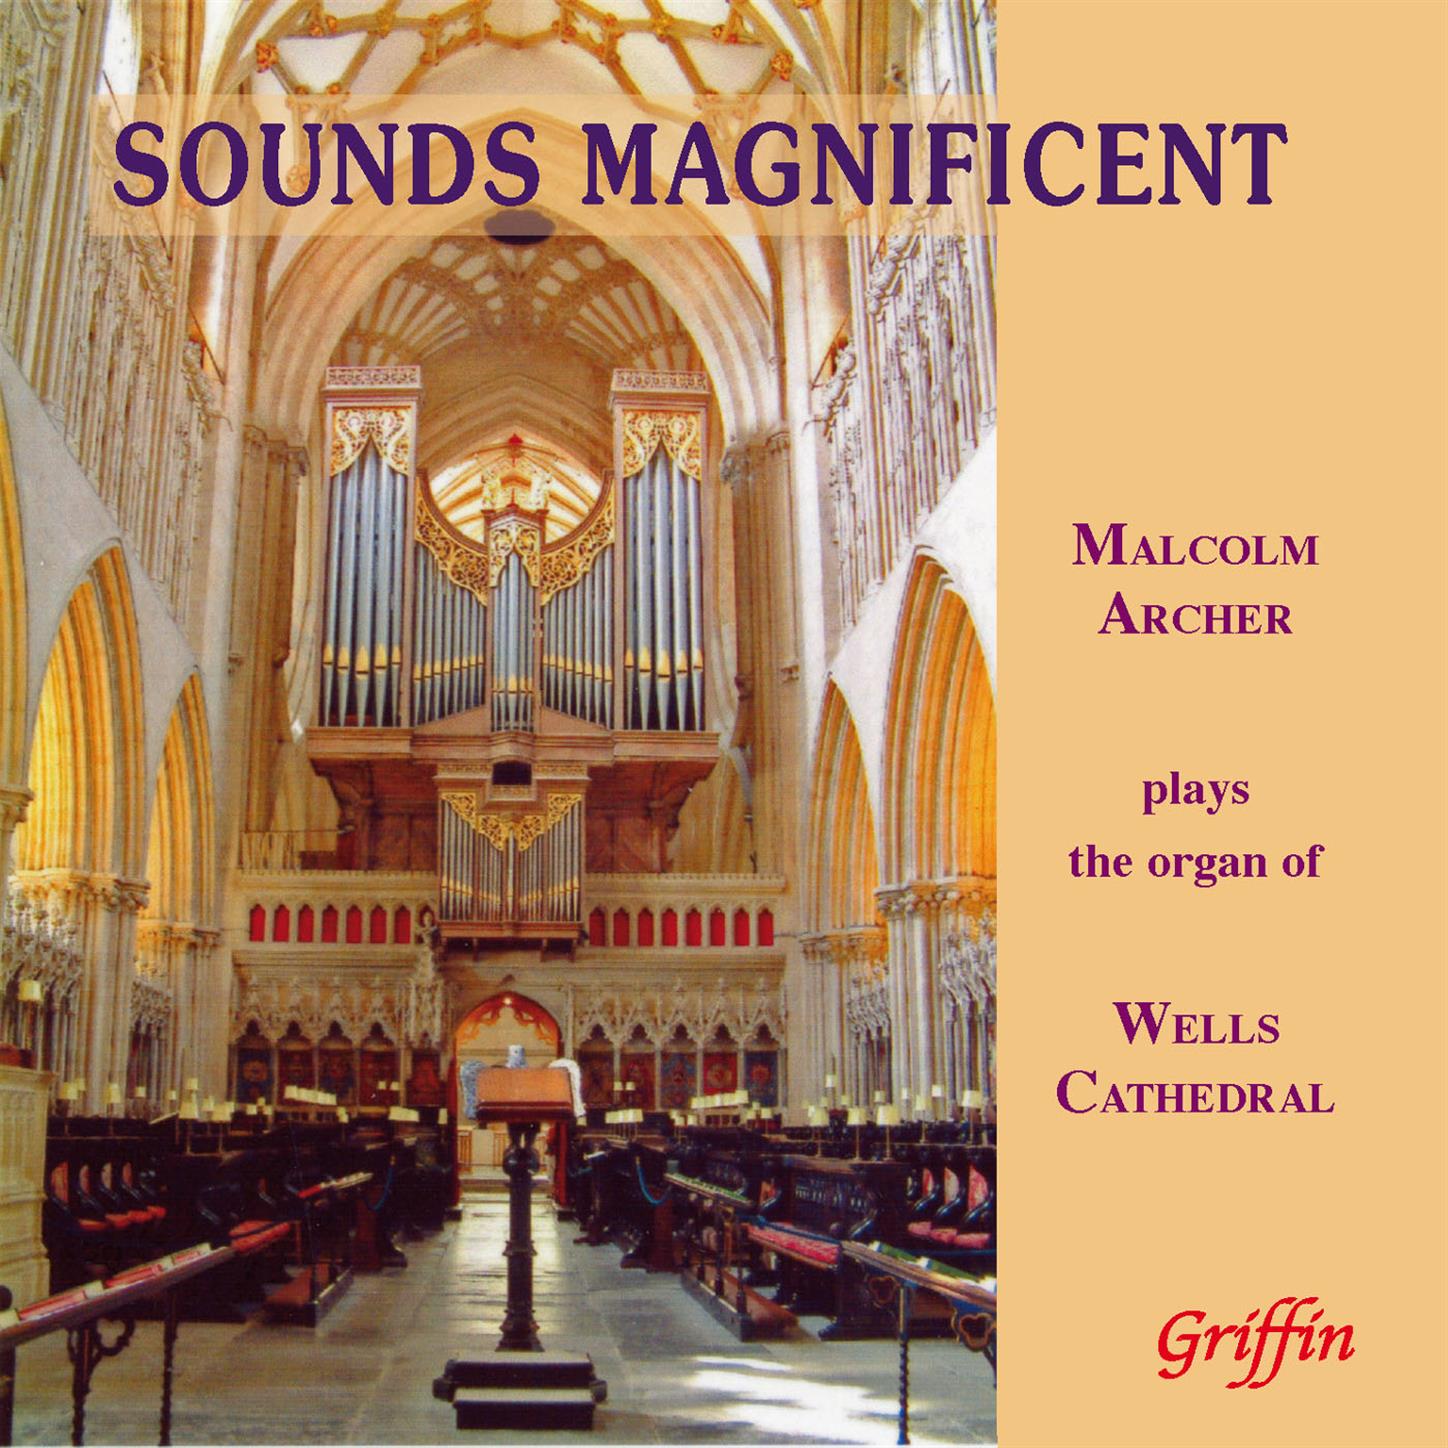 Sounds Magnificent: Malcolm Archer Plays the Organ of Wells Cathedral